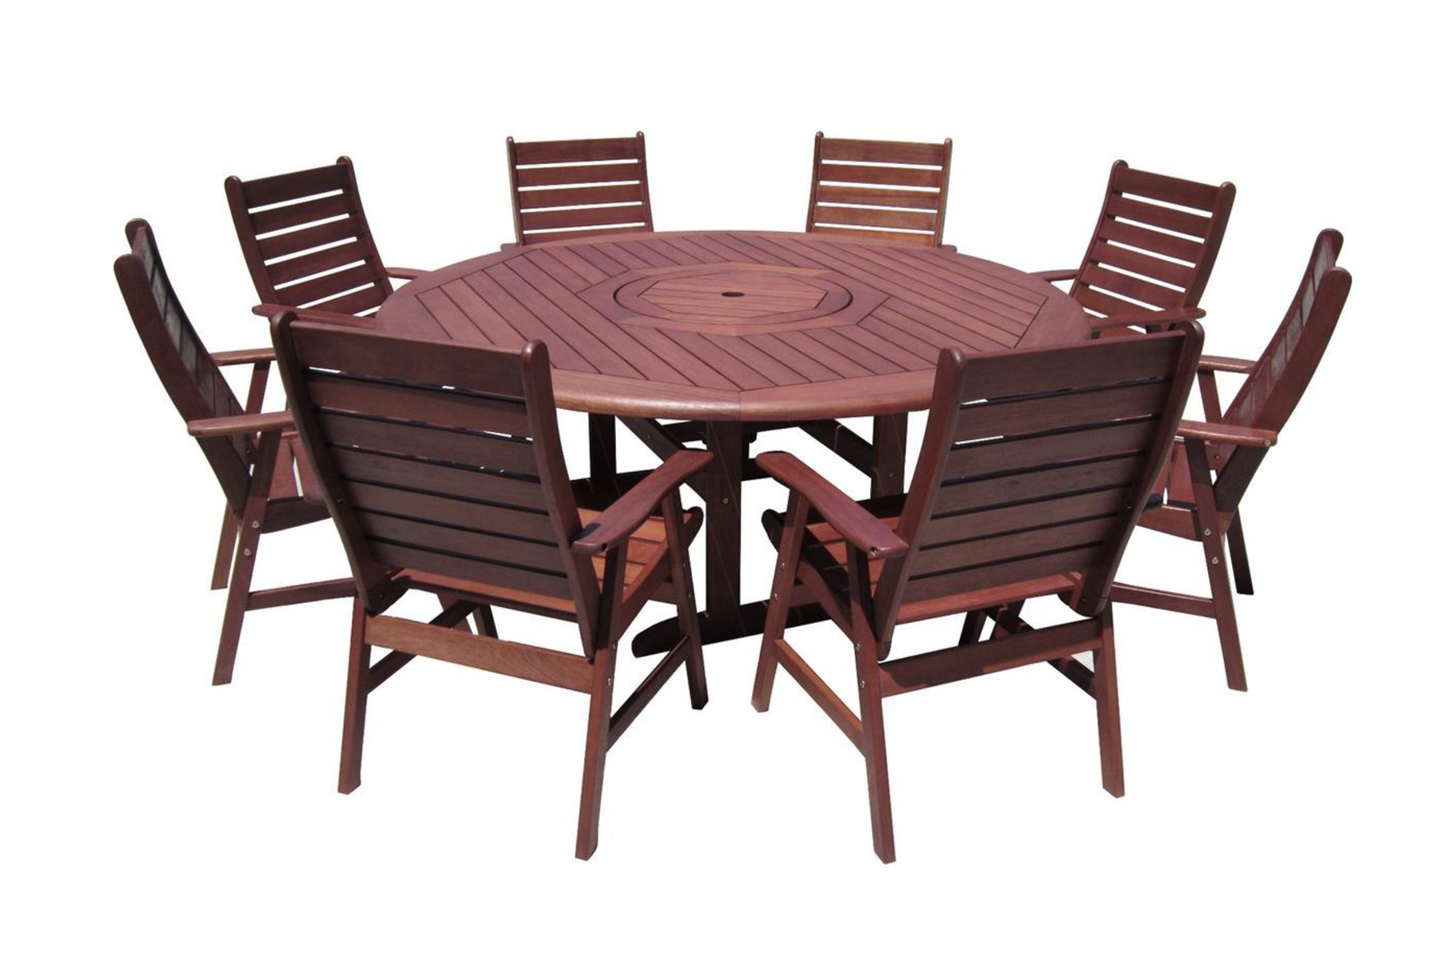 Morton Octagonal Table with Lazy Susan Insert